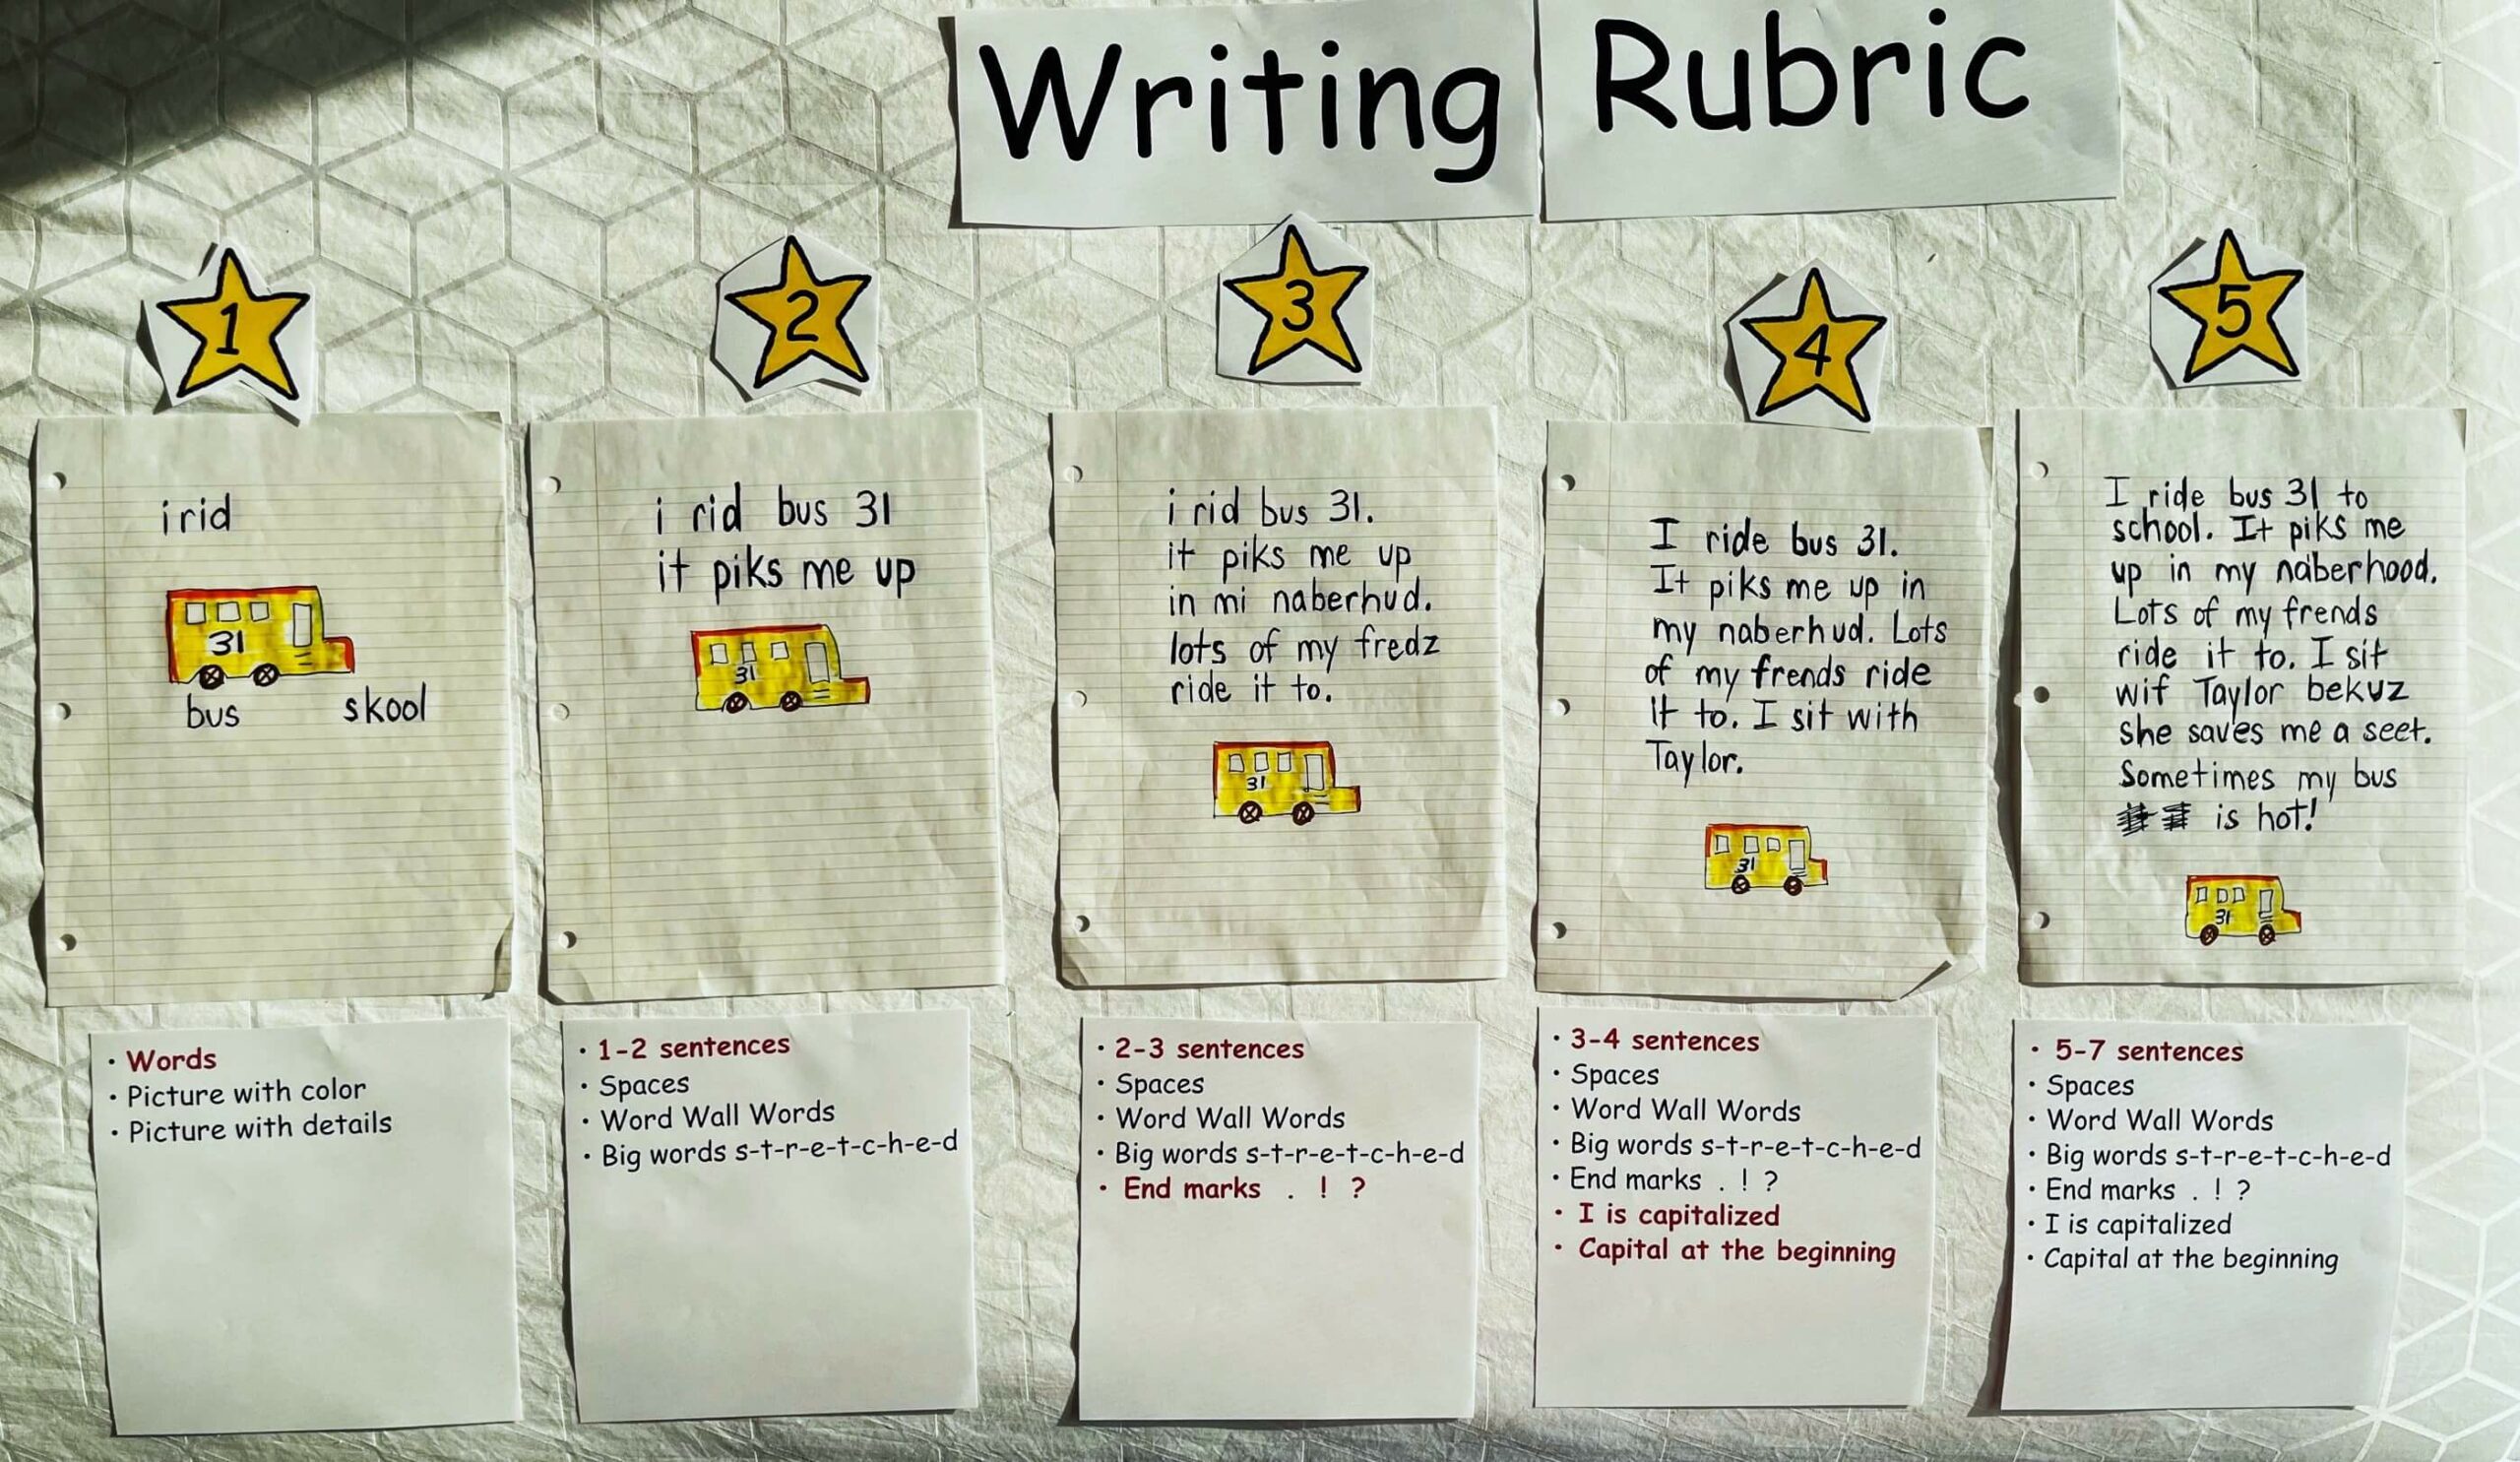 Writing Rubric Example - Bus picture and words - 5-Star Rubric